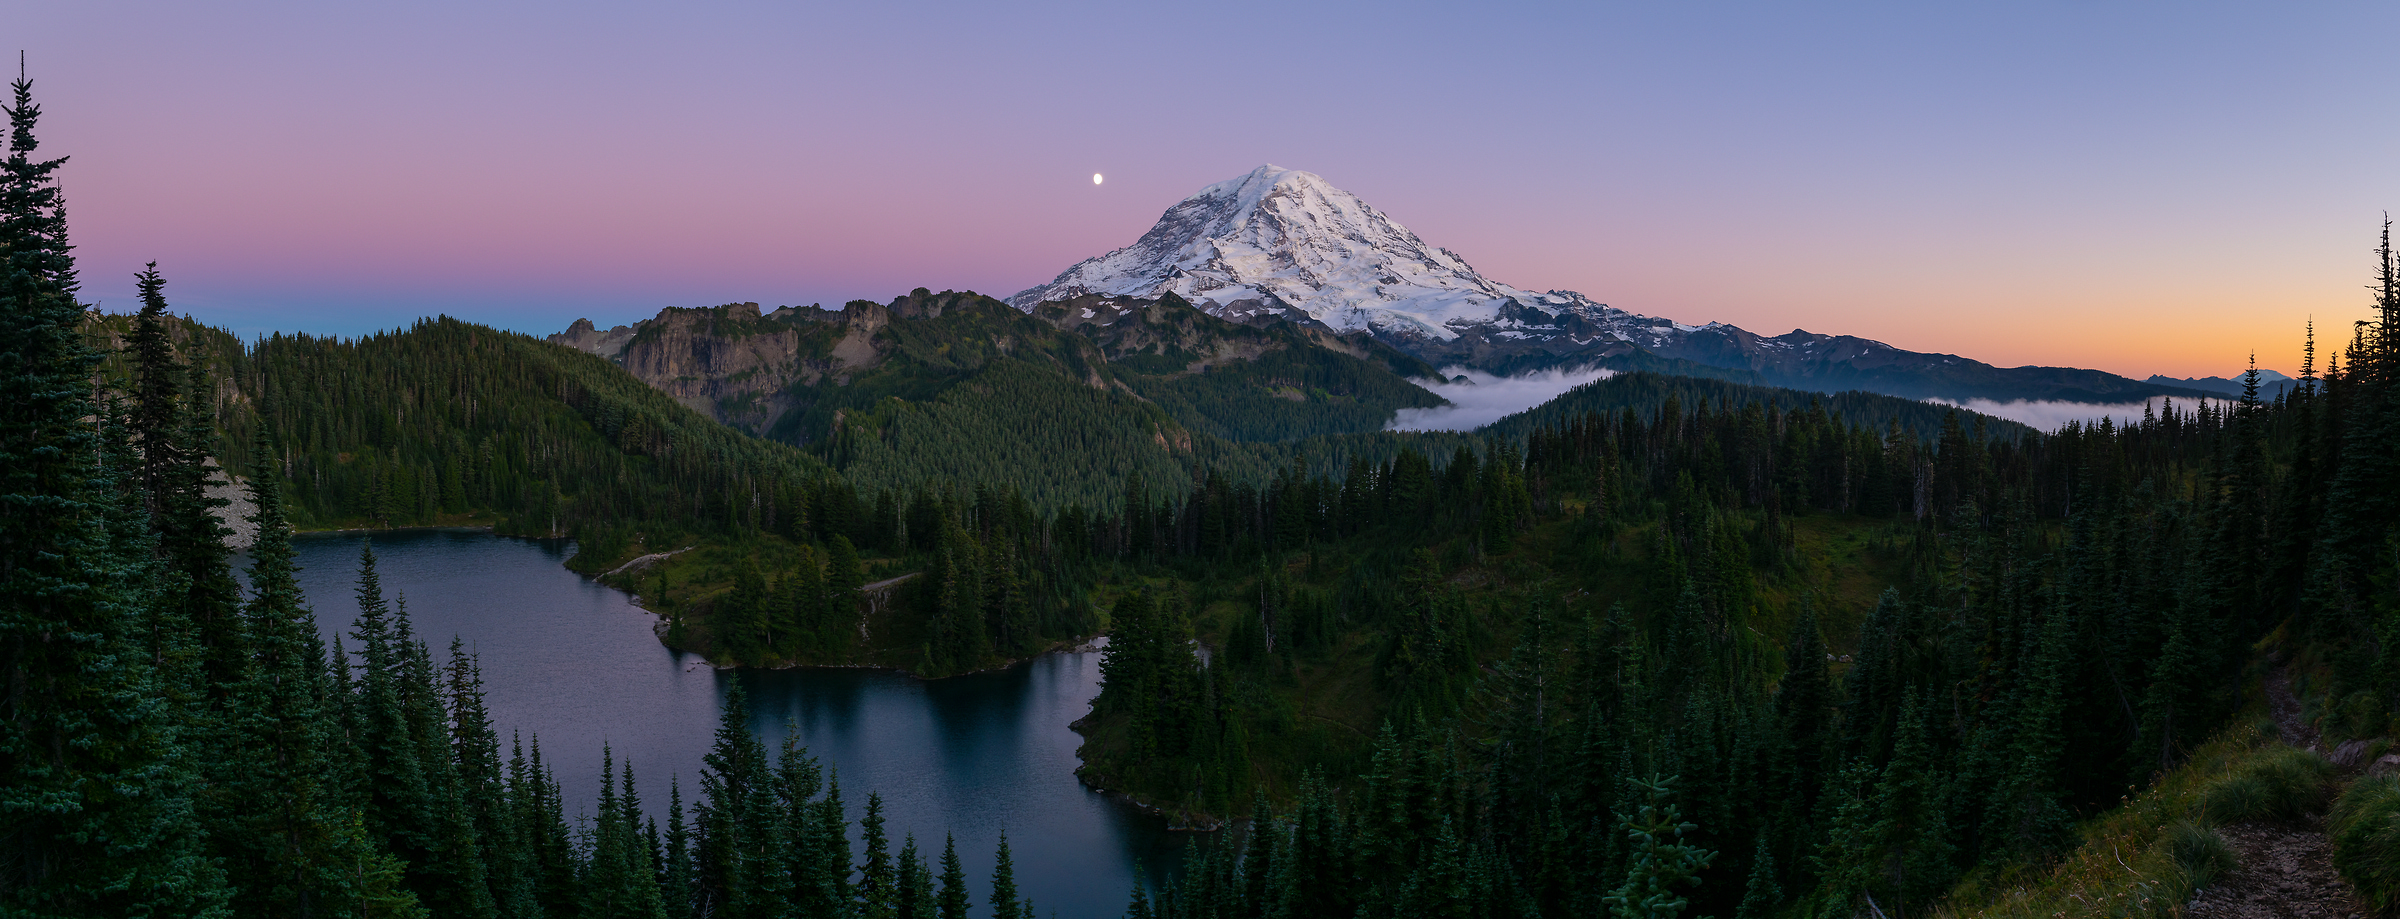 94 megapixels! A very high resolution, large-format VAST photo print of Mt. Rainier at sunset with the moon; landscape photograph created by Greg Probst in Mt. Rainier National Park.